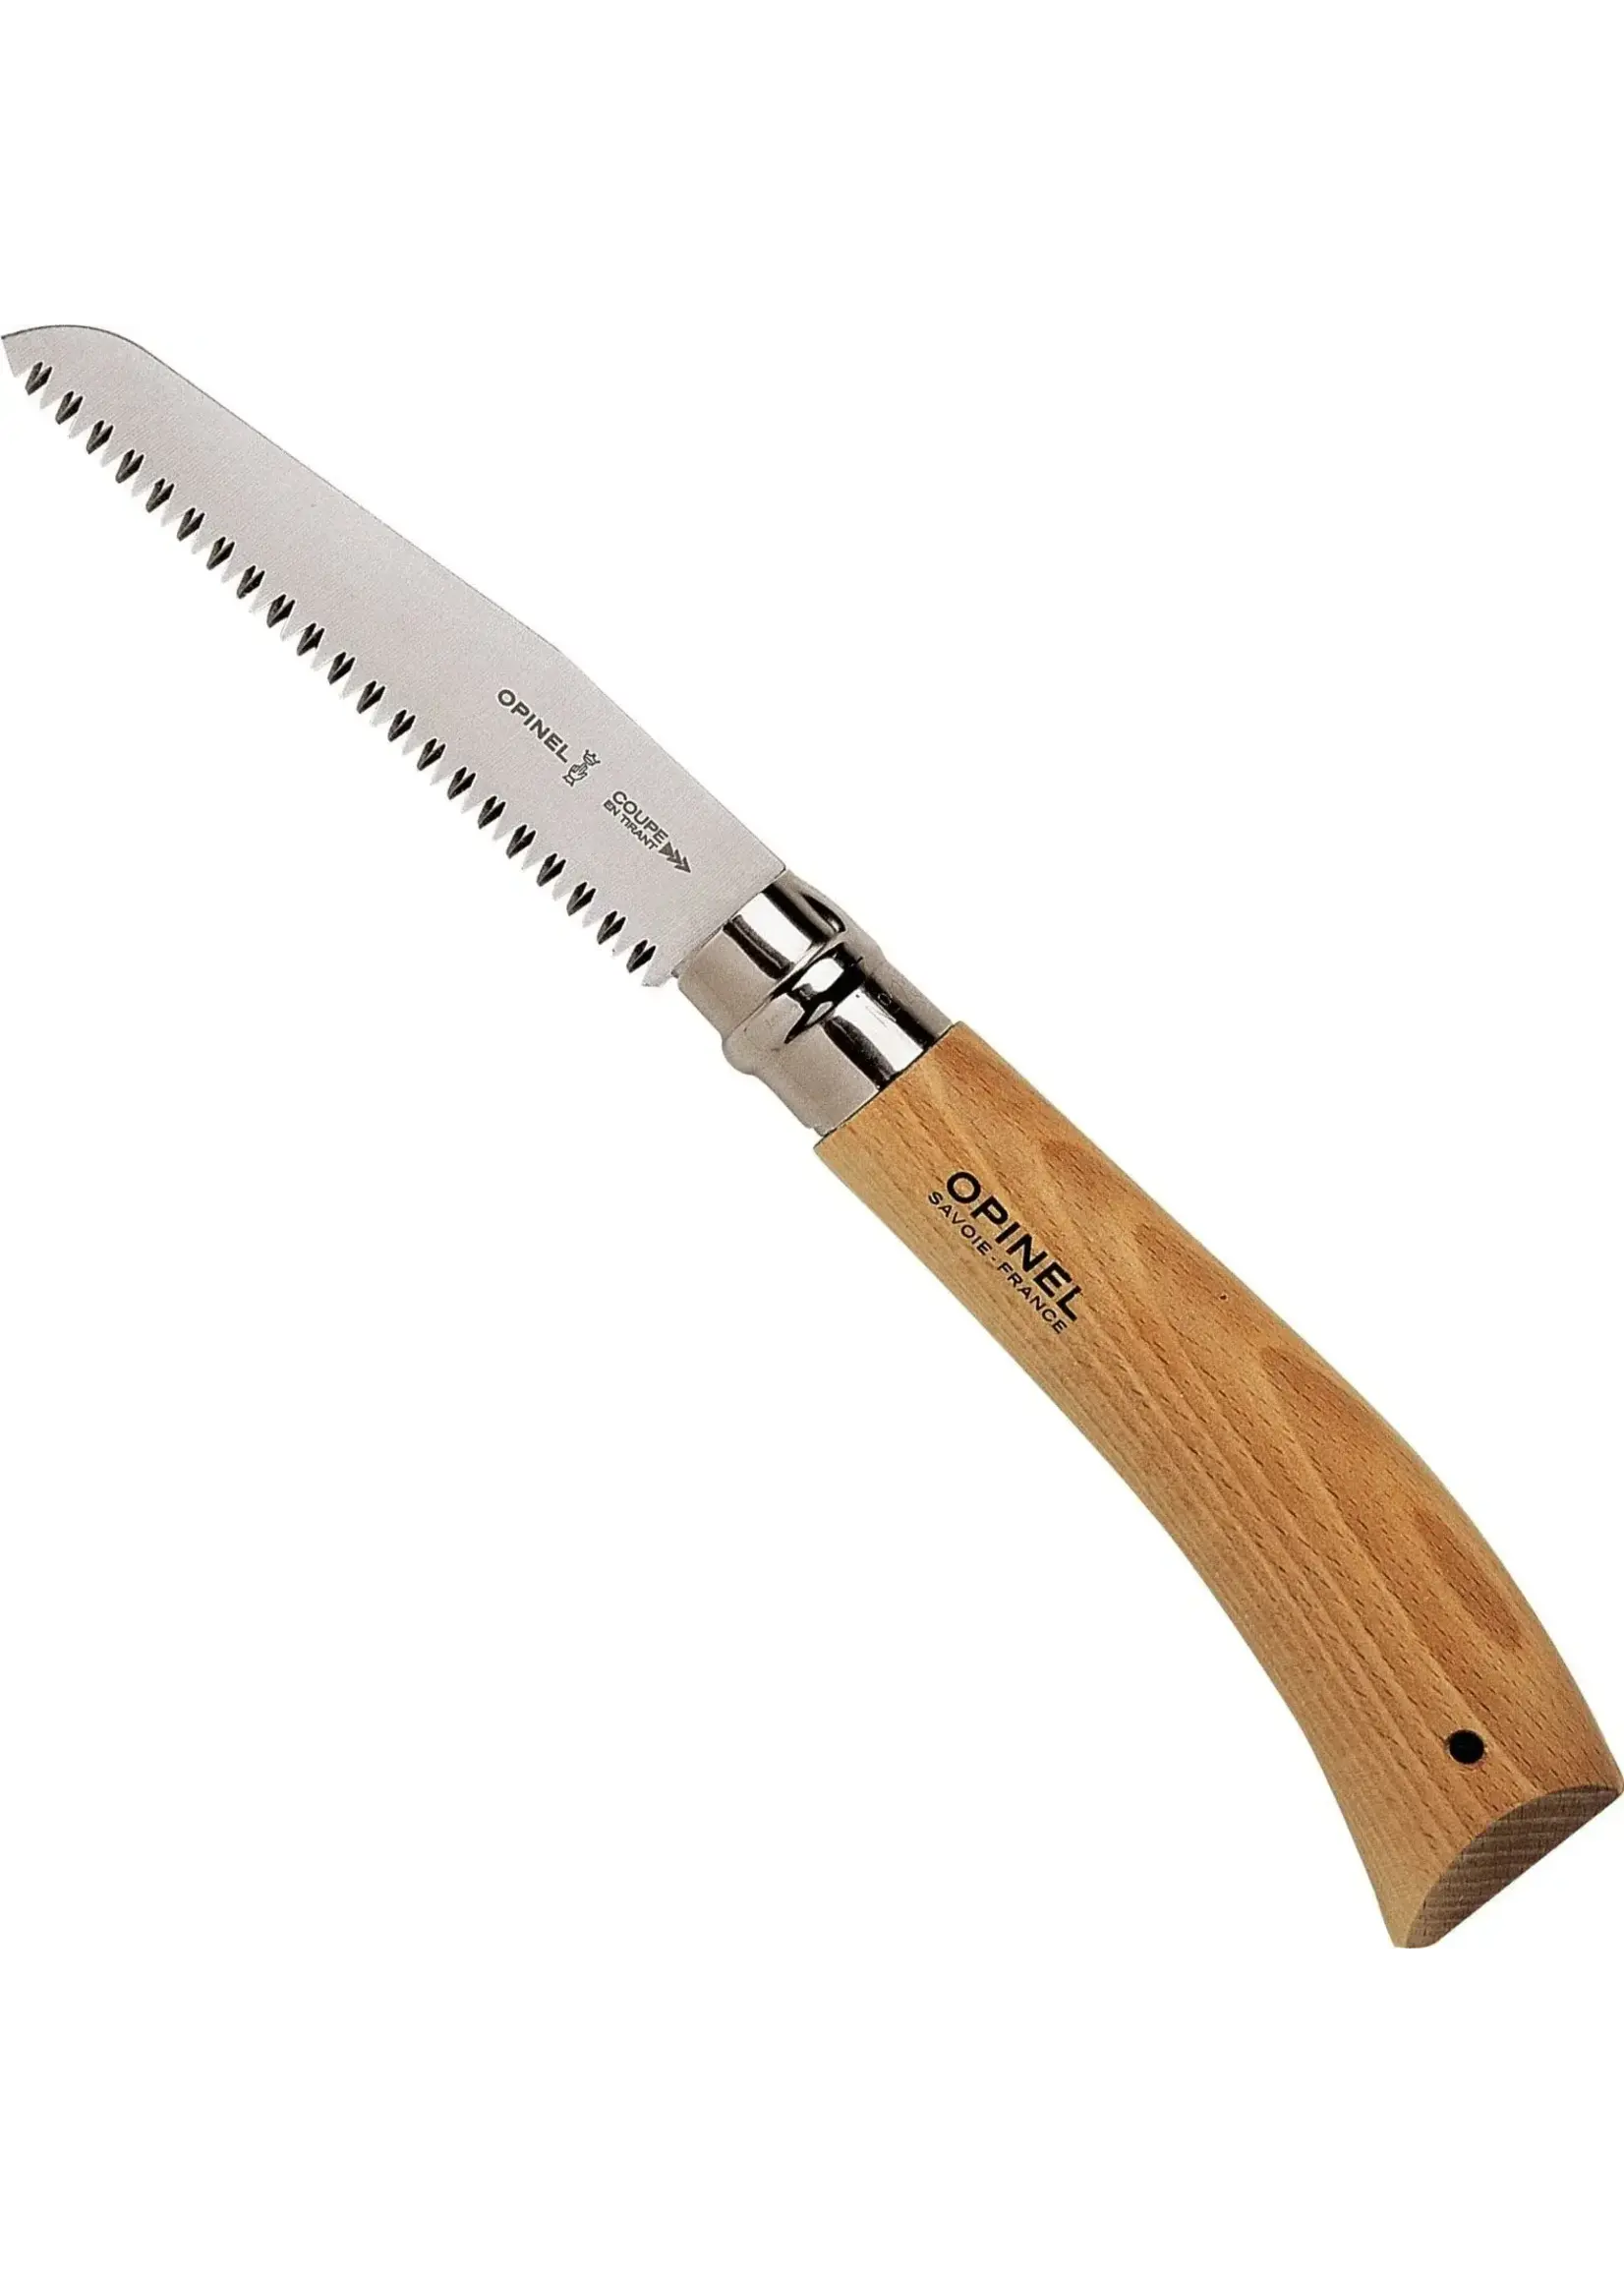 Opinel Opinel No. 12 Carbon Steel Folding Saw